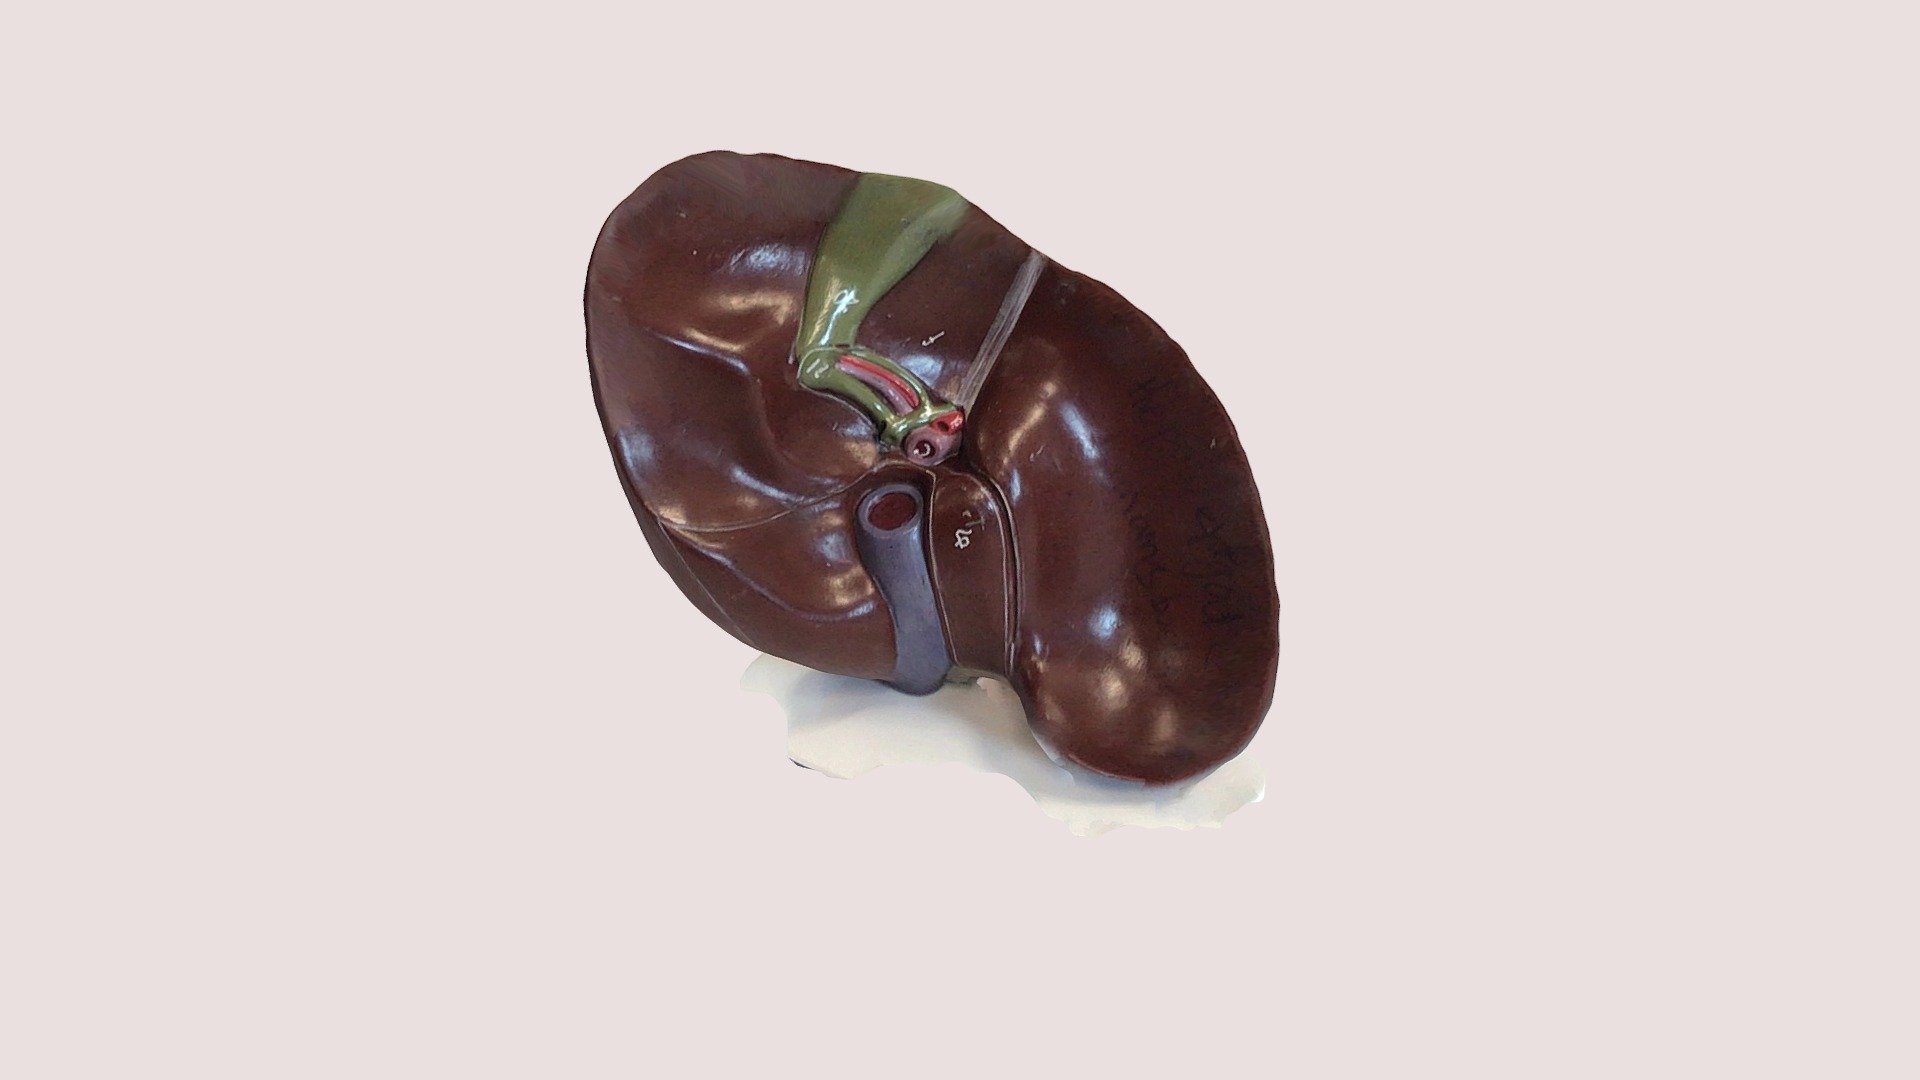 Anatomical model of the liver